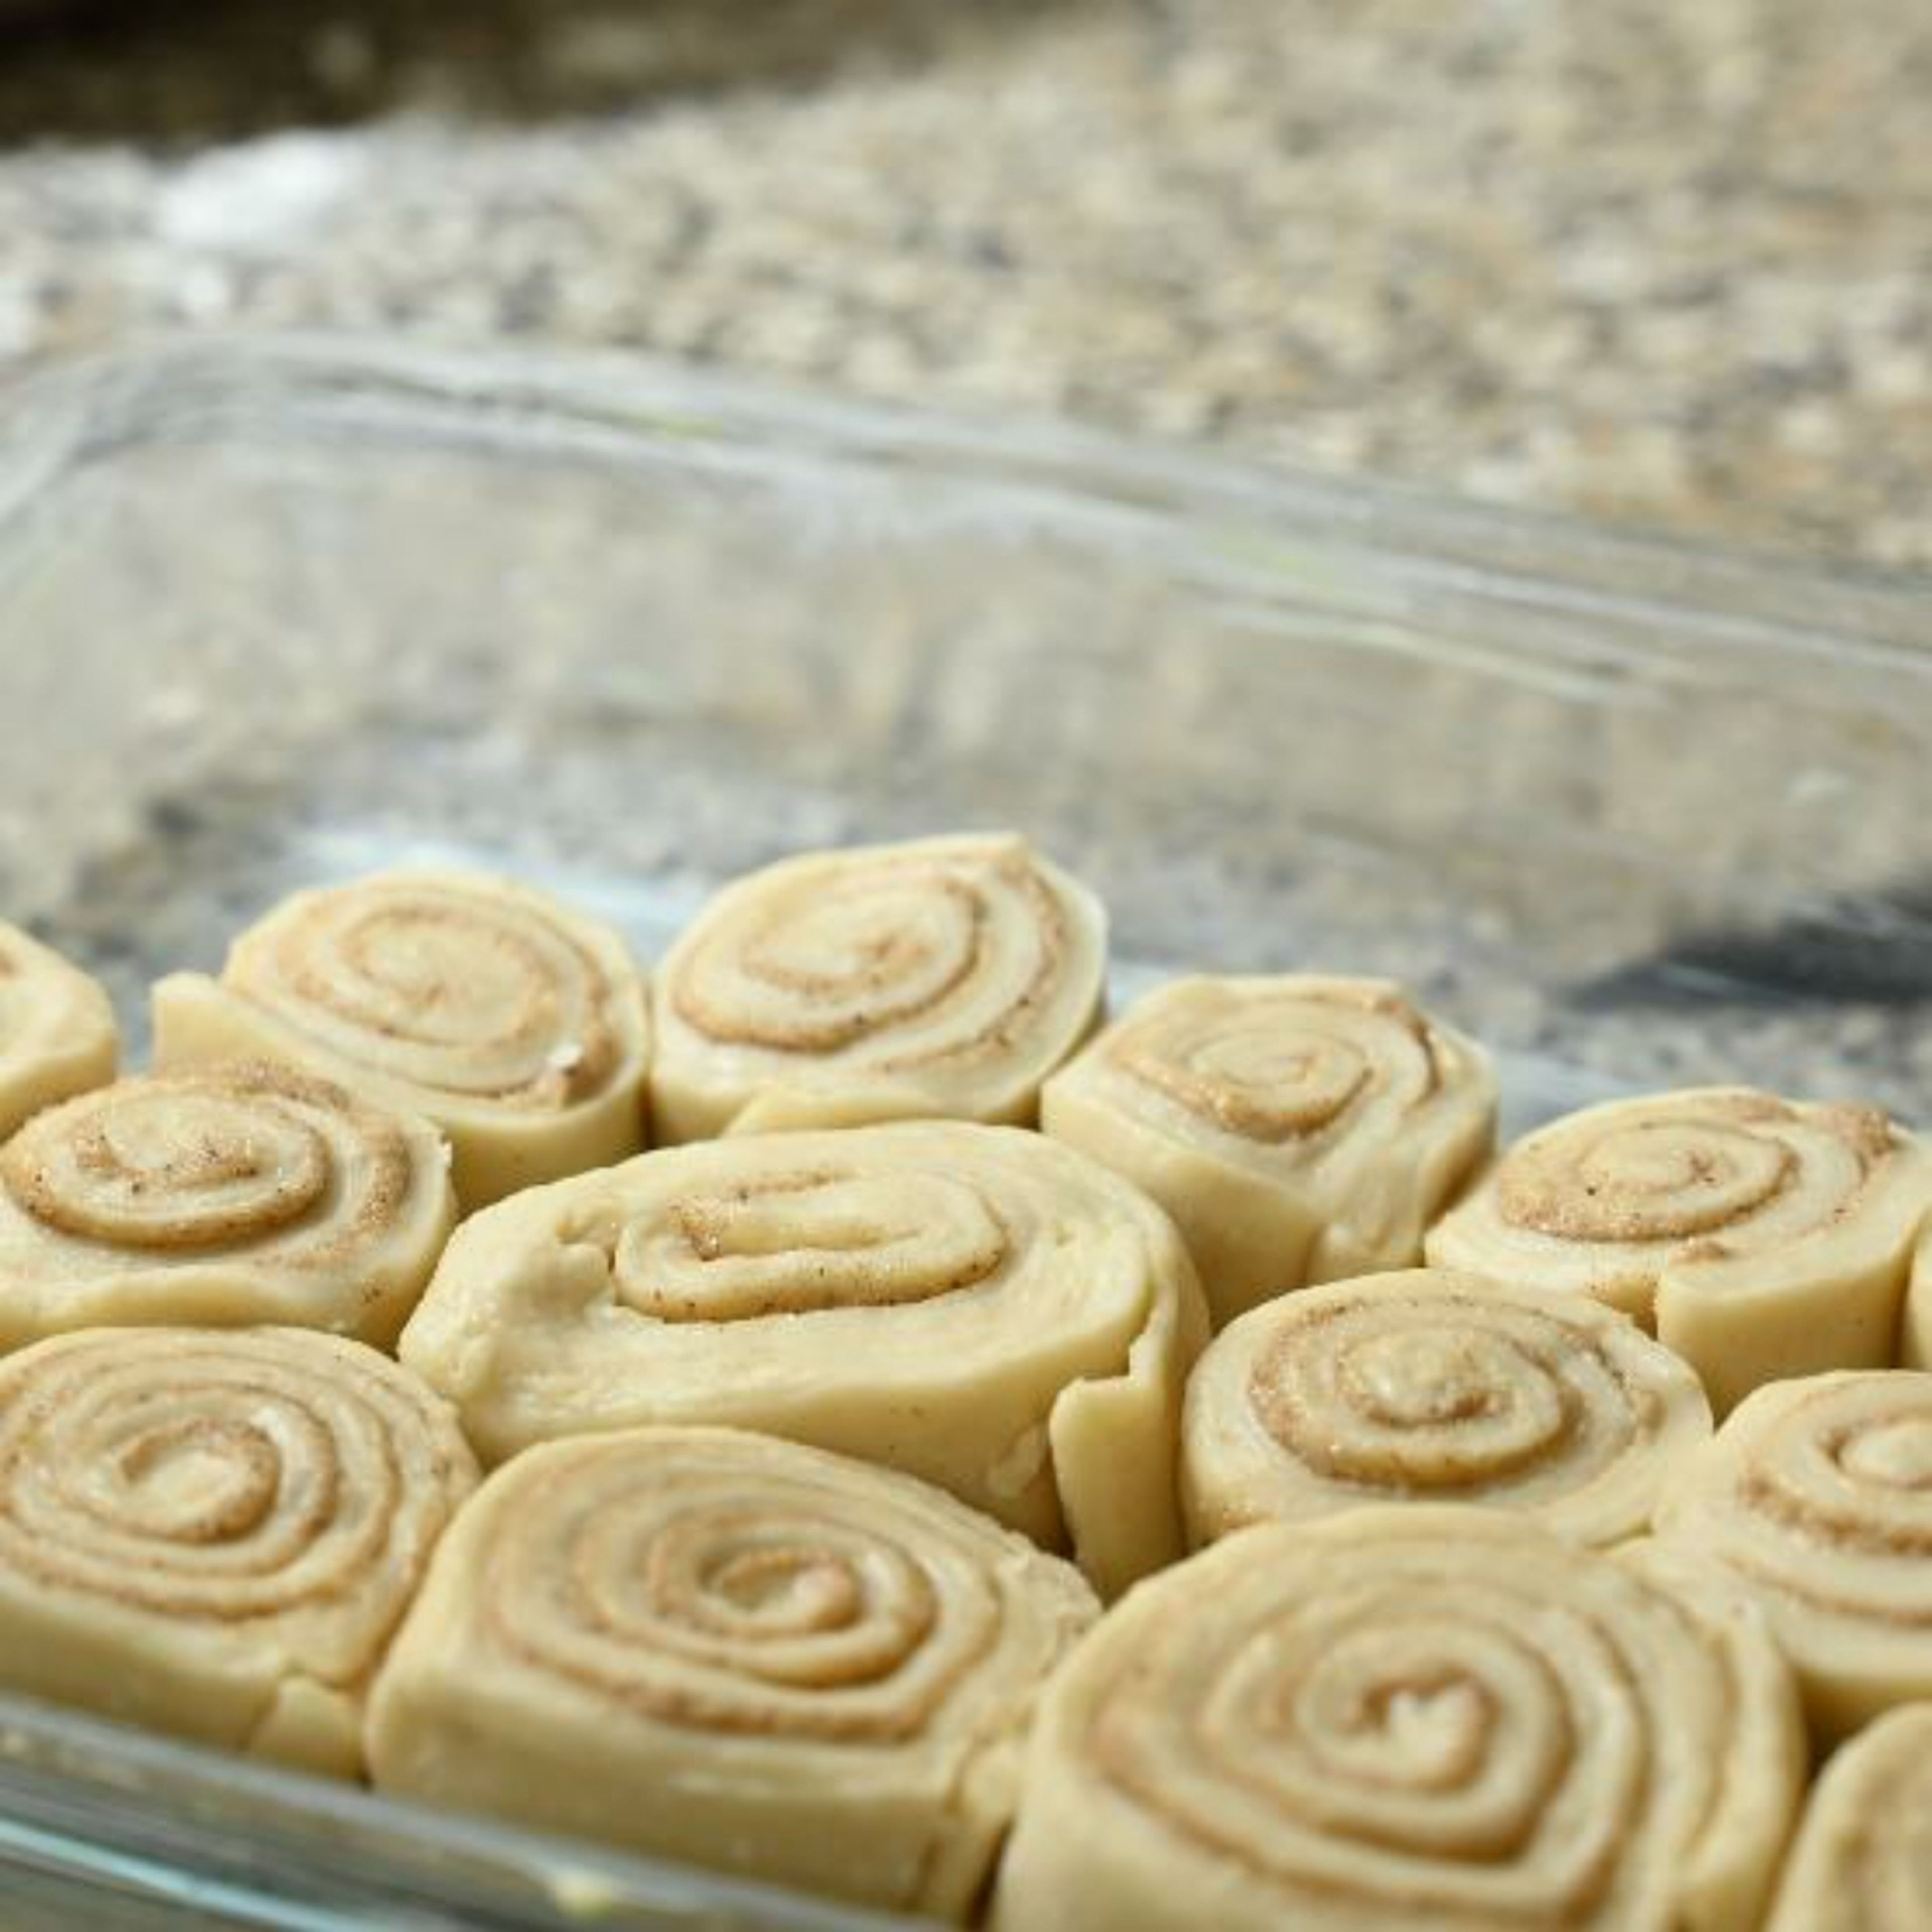 Cut the log into small pieces. Butter a non-stick baking tray and place the cut cinnamon rolls into the prepared tin.